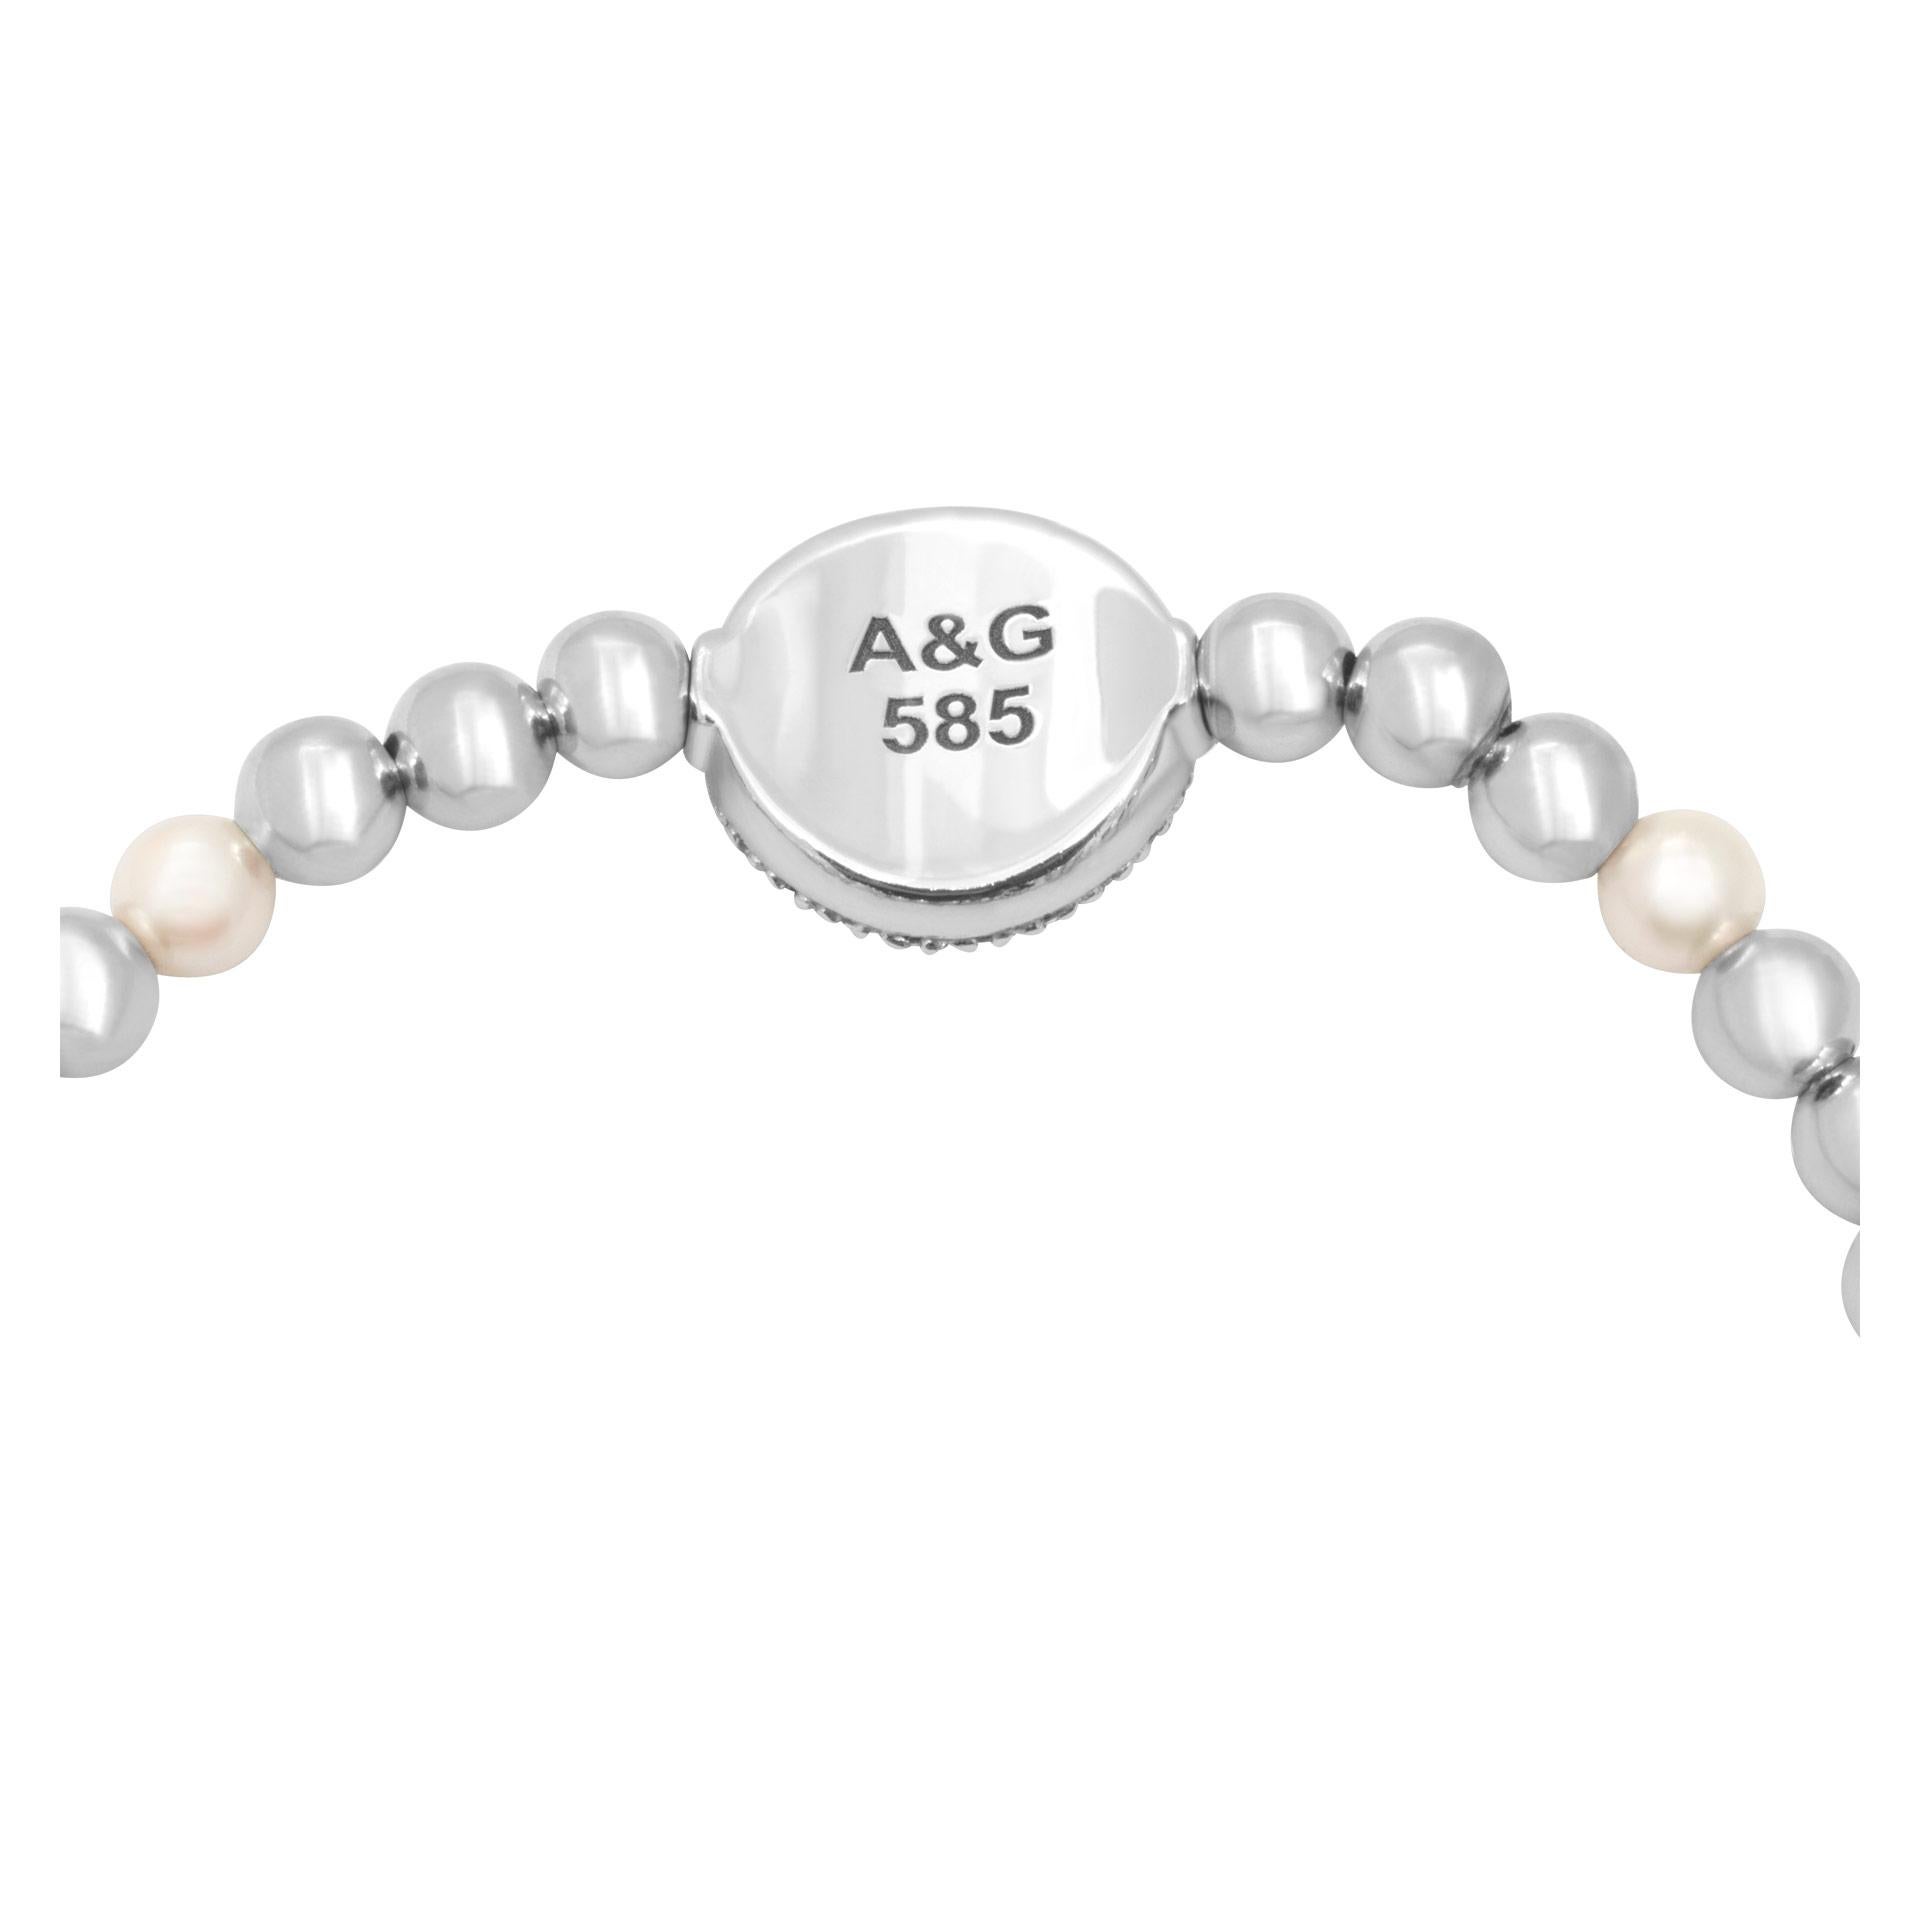 A&G Signed Beads and Pave Diamonds Buttons Bracelet in 14k White Gold In Excellent Condition For Sale In Surfside, FL